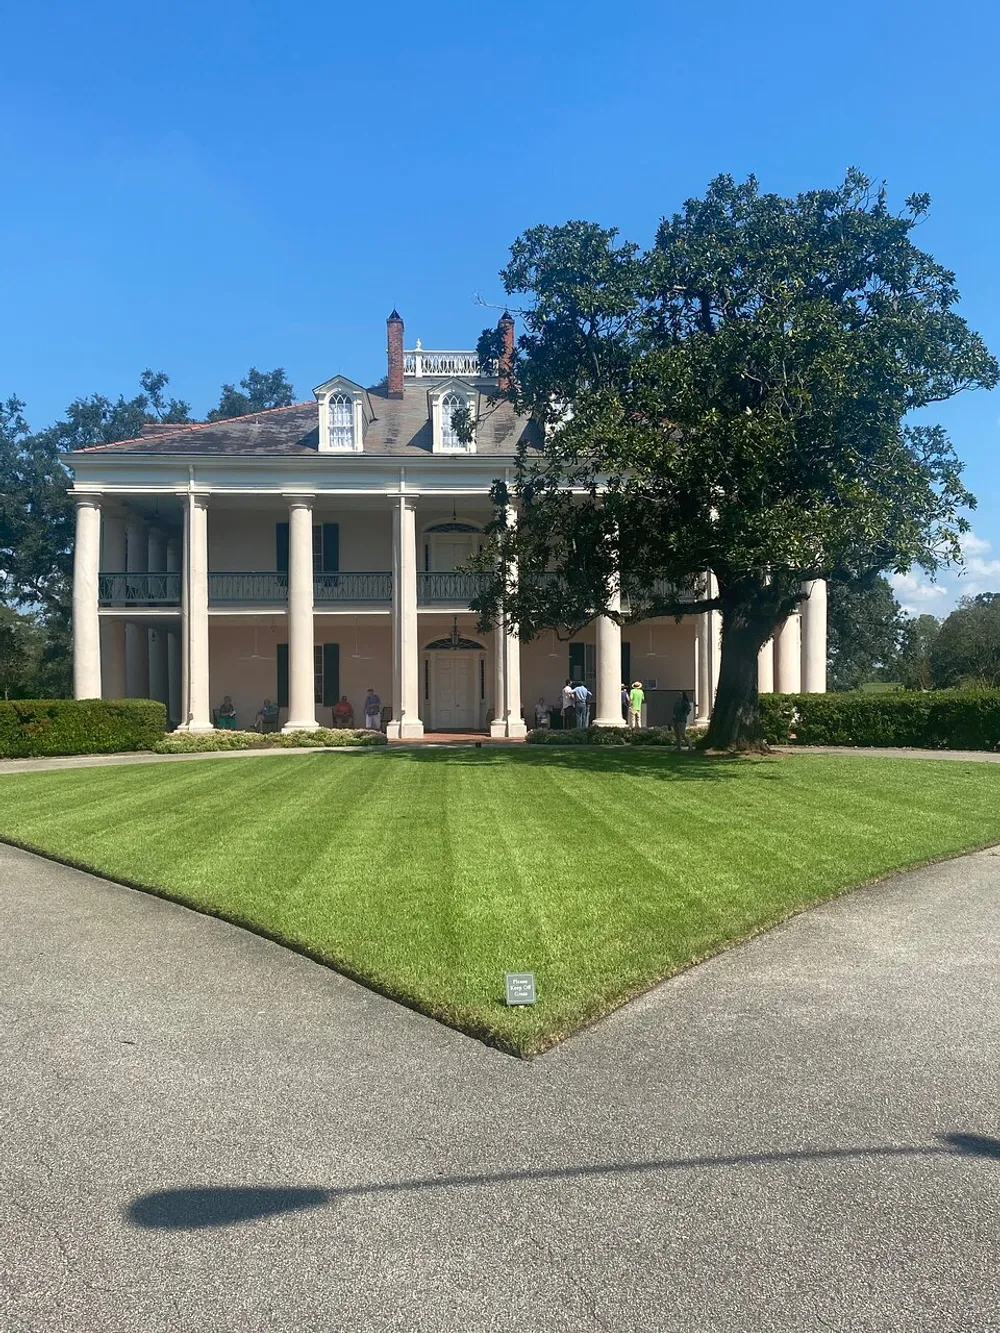 The image shows a grand two-story colonial-style house with a columned portico set in manicured grounds under a clear blue sky